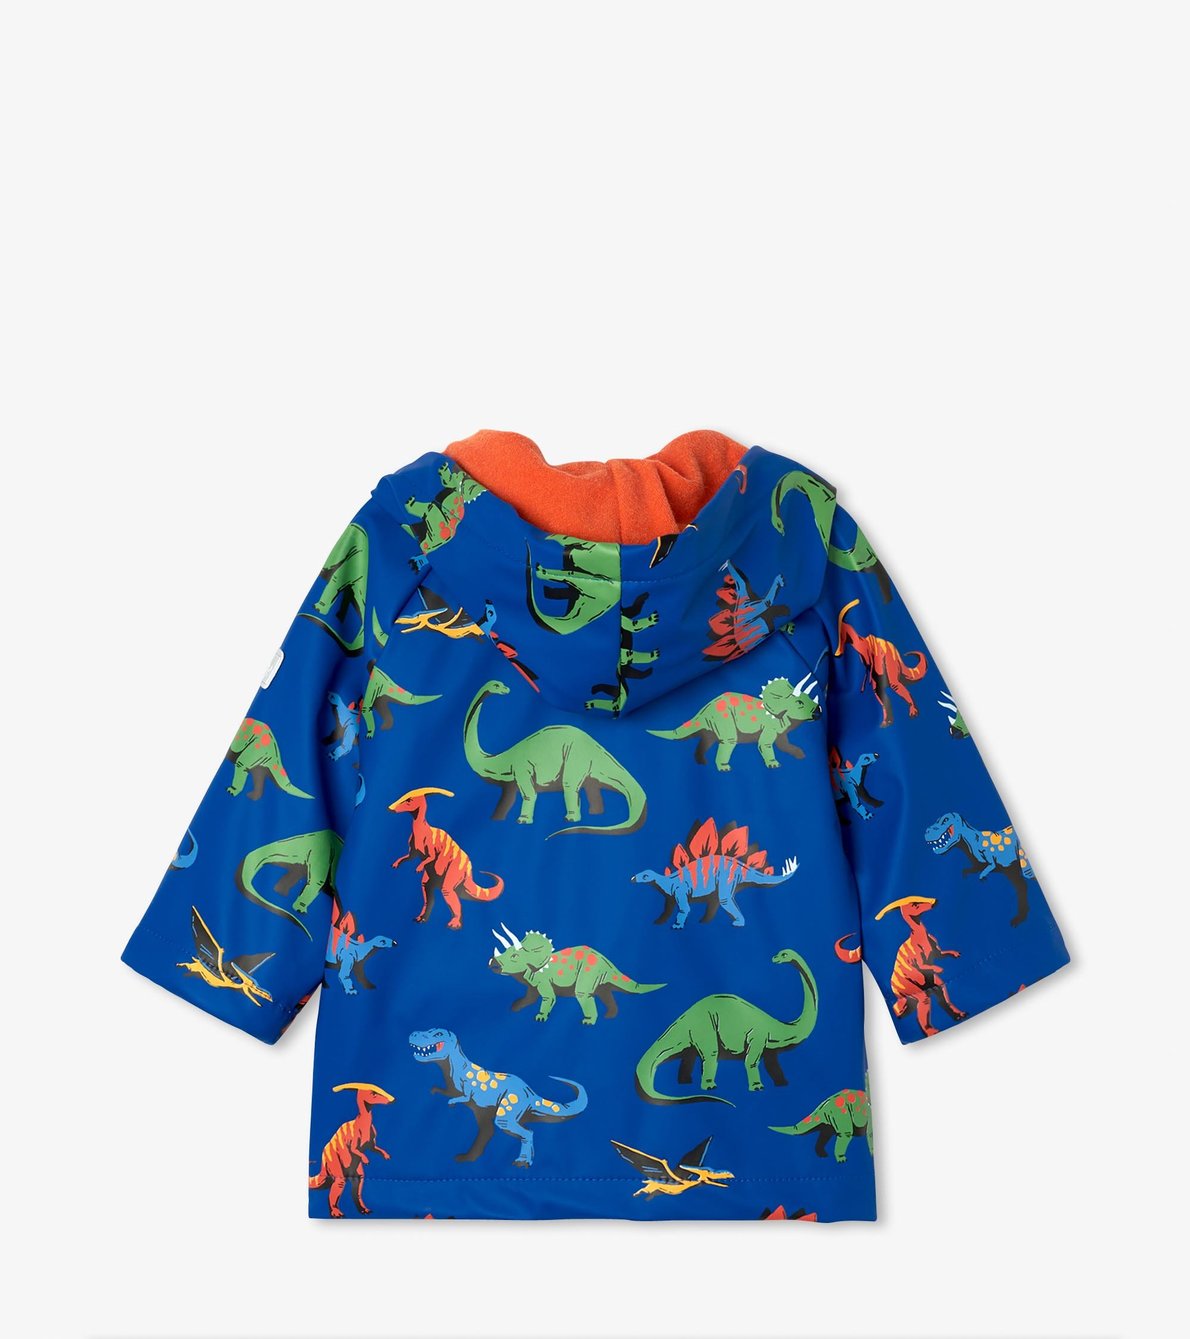 View larger image of Friendly Dinos Baby Raincoat